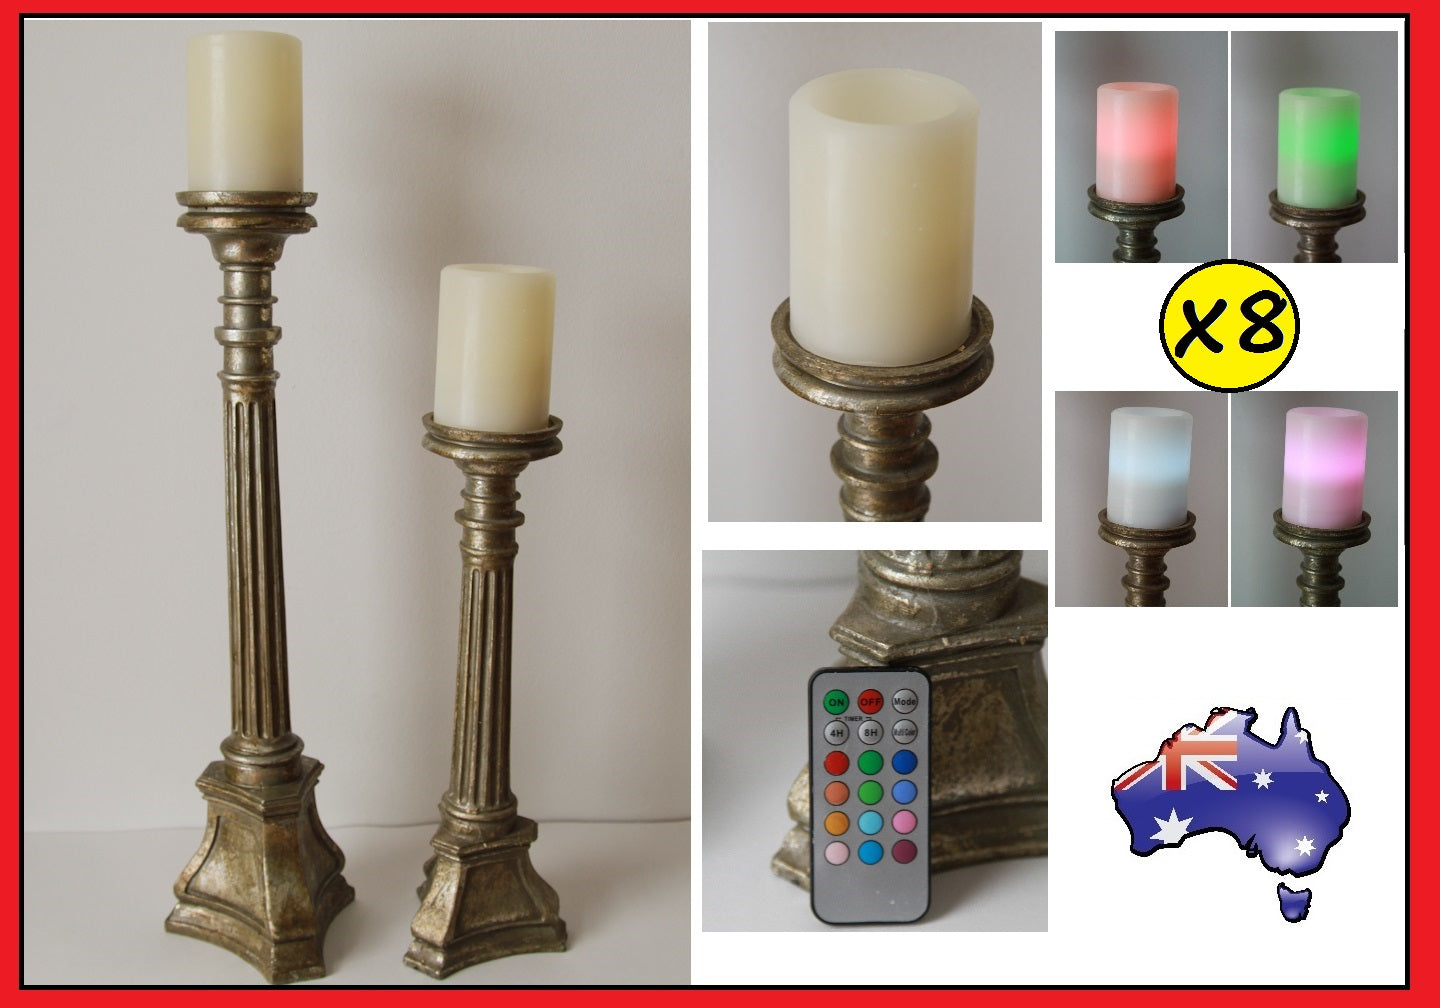 8 x Electric Candles / Vintage Look Candle Holders Ornate Candlestick Decorative